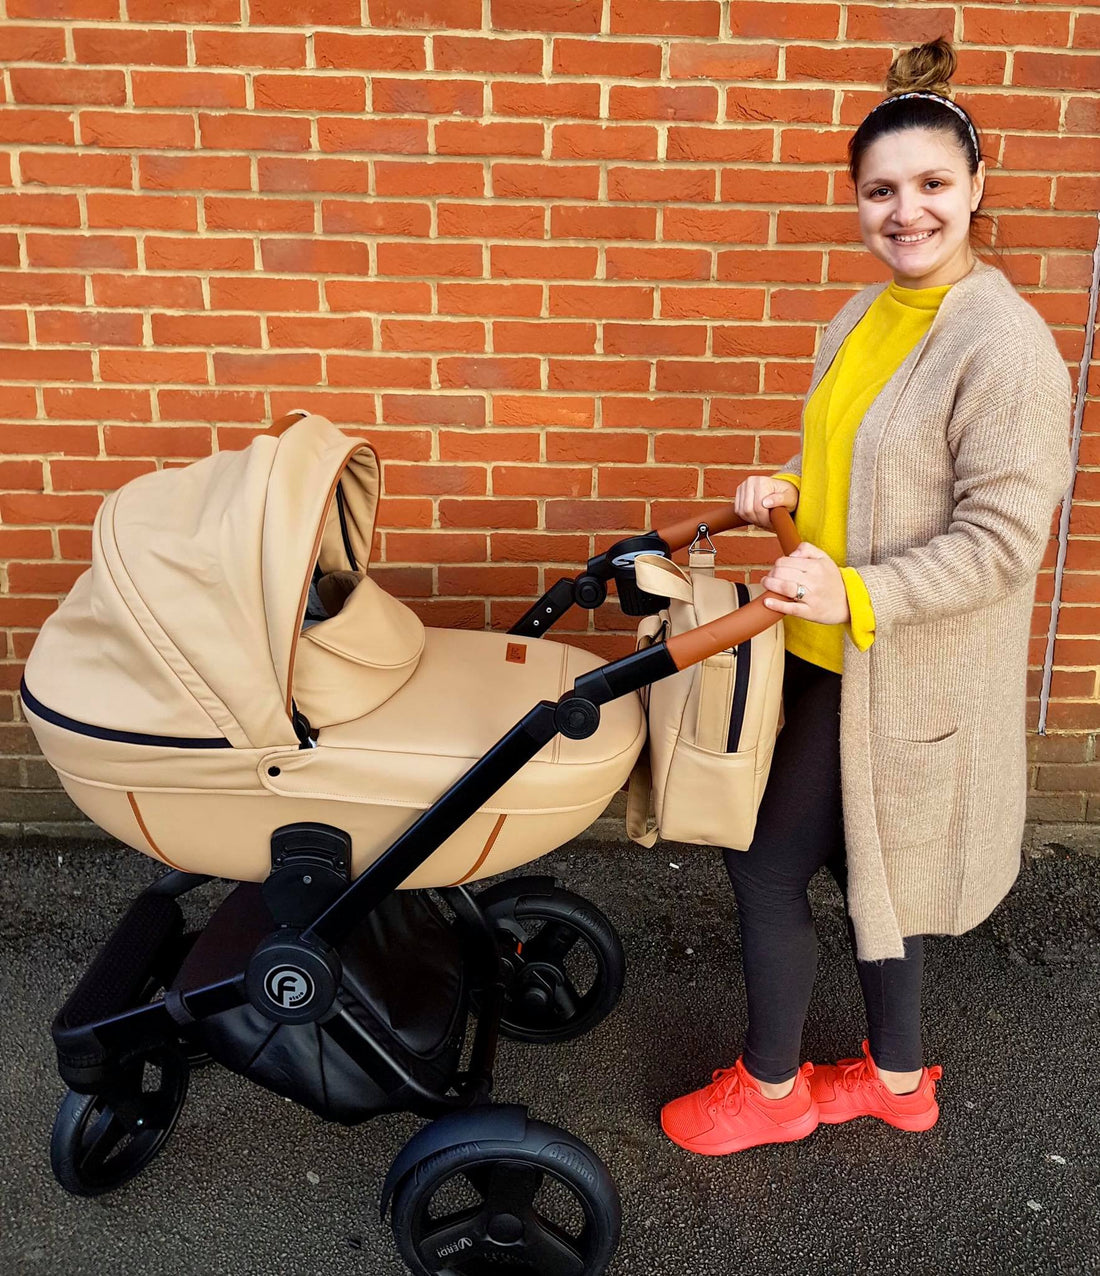 The Benefits of Choosing a Pram for Your Baby